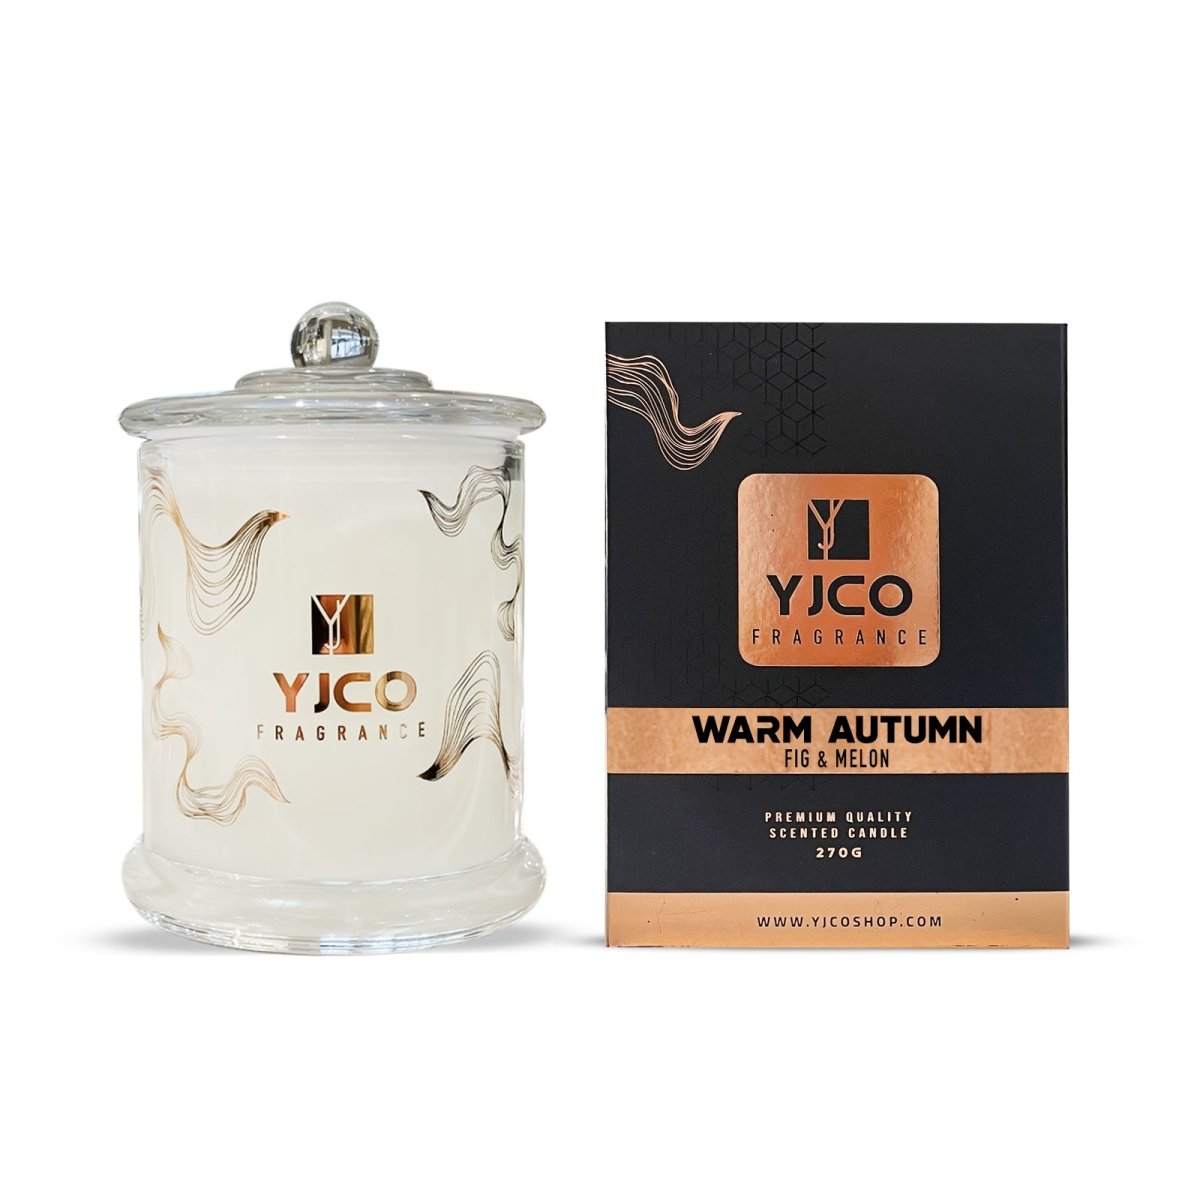 Warm Autumn Premium Scented 2 wick Candle 270G - YJCO FRAGRANCE